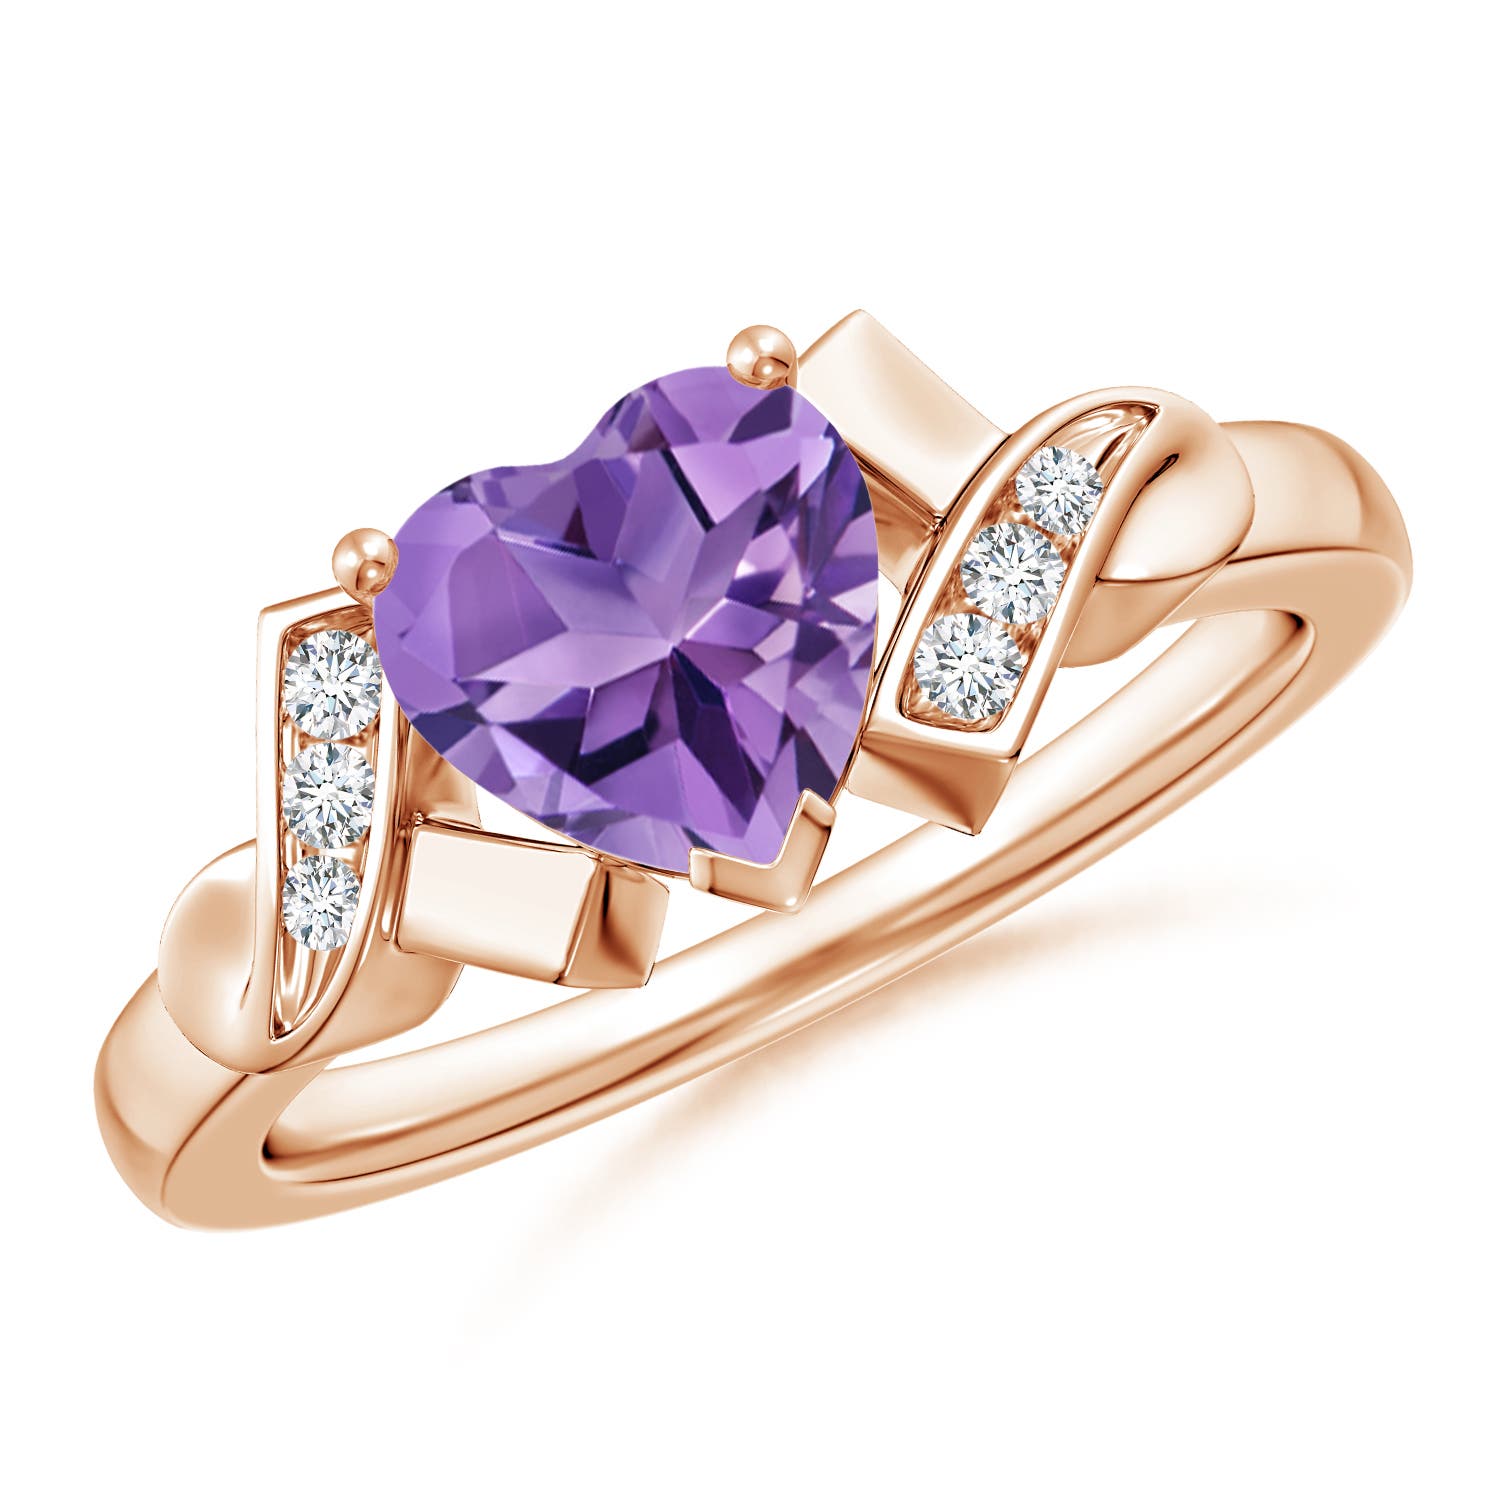 AA - Amethyst / 1.17 CT / 14 KT Rose Gold